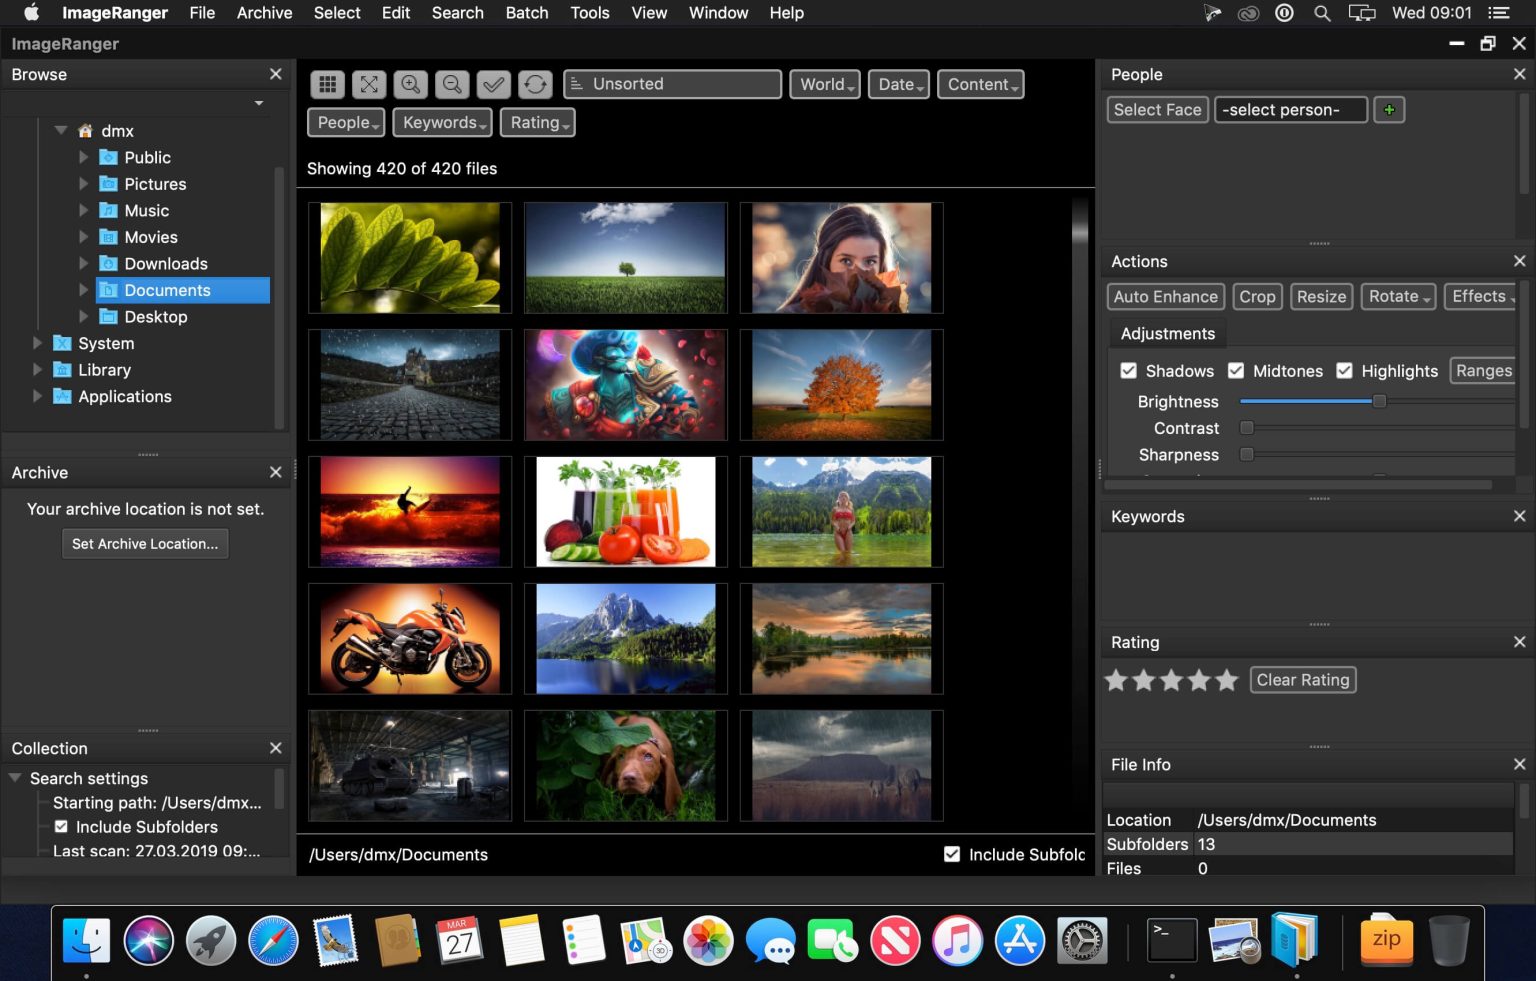 download the last version for ios ImageRanger Pro Edition 1.9.4.1865